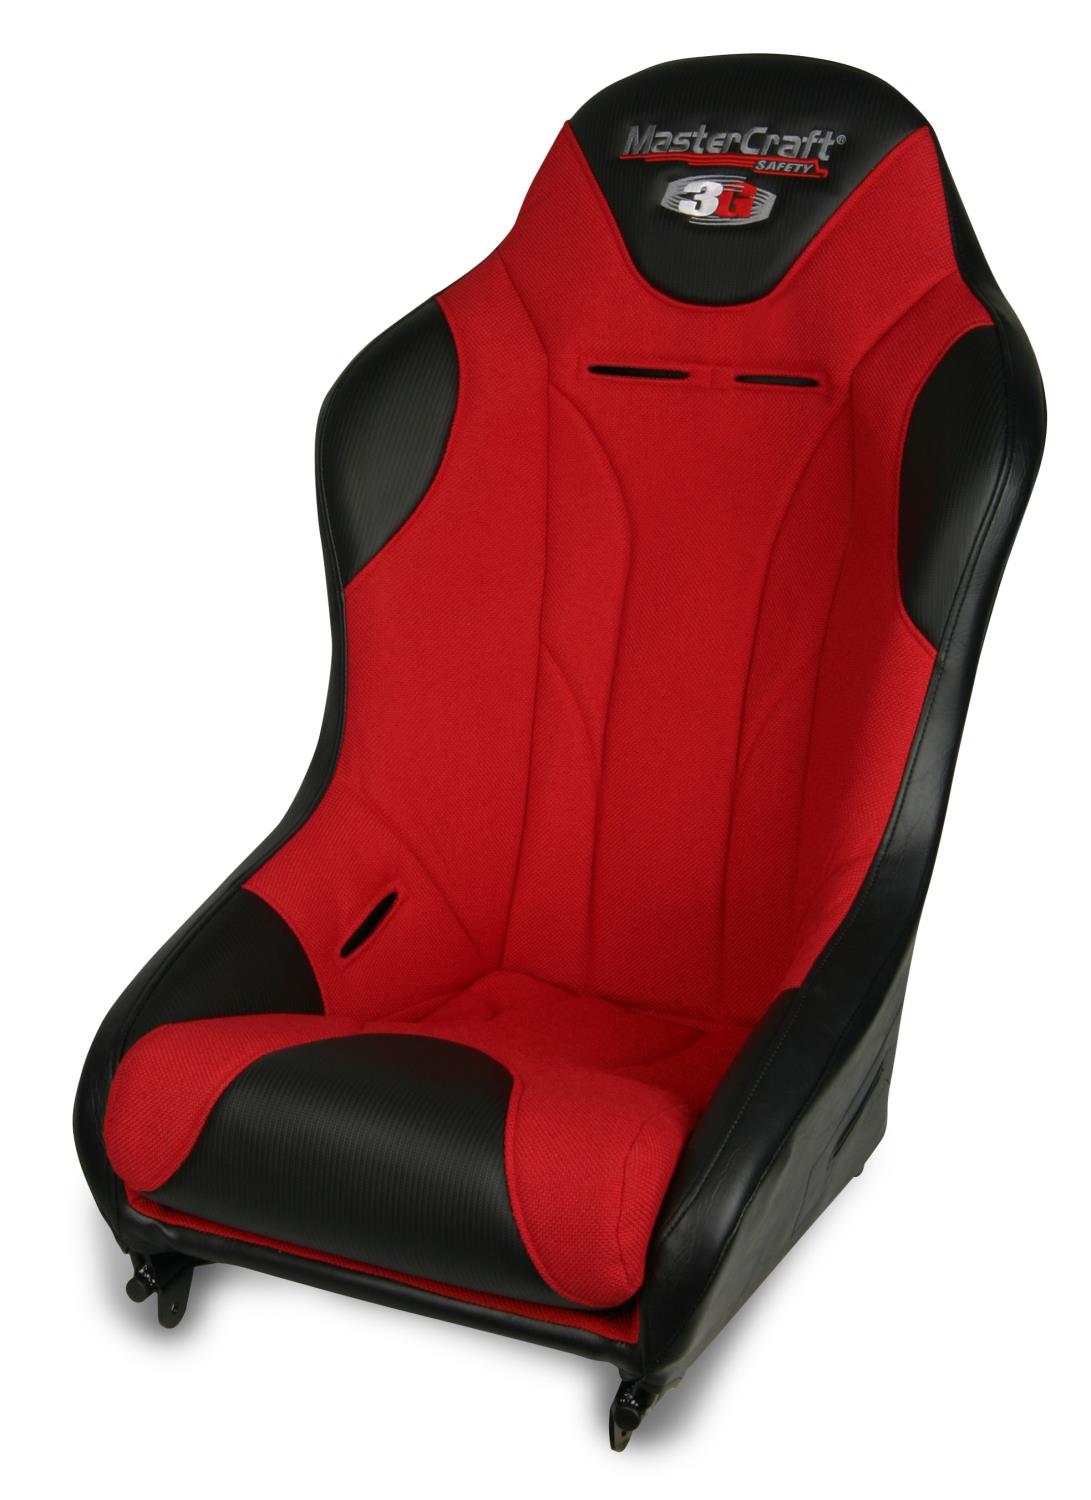 572032 2 in. WIDER 3G-4 Seat w/DirtSport Stitch Pattern, Black with Red Fabric Center and Red Side Panels, Black Band